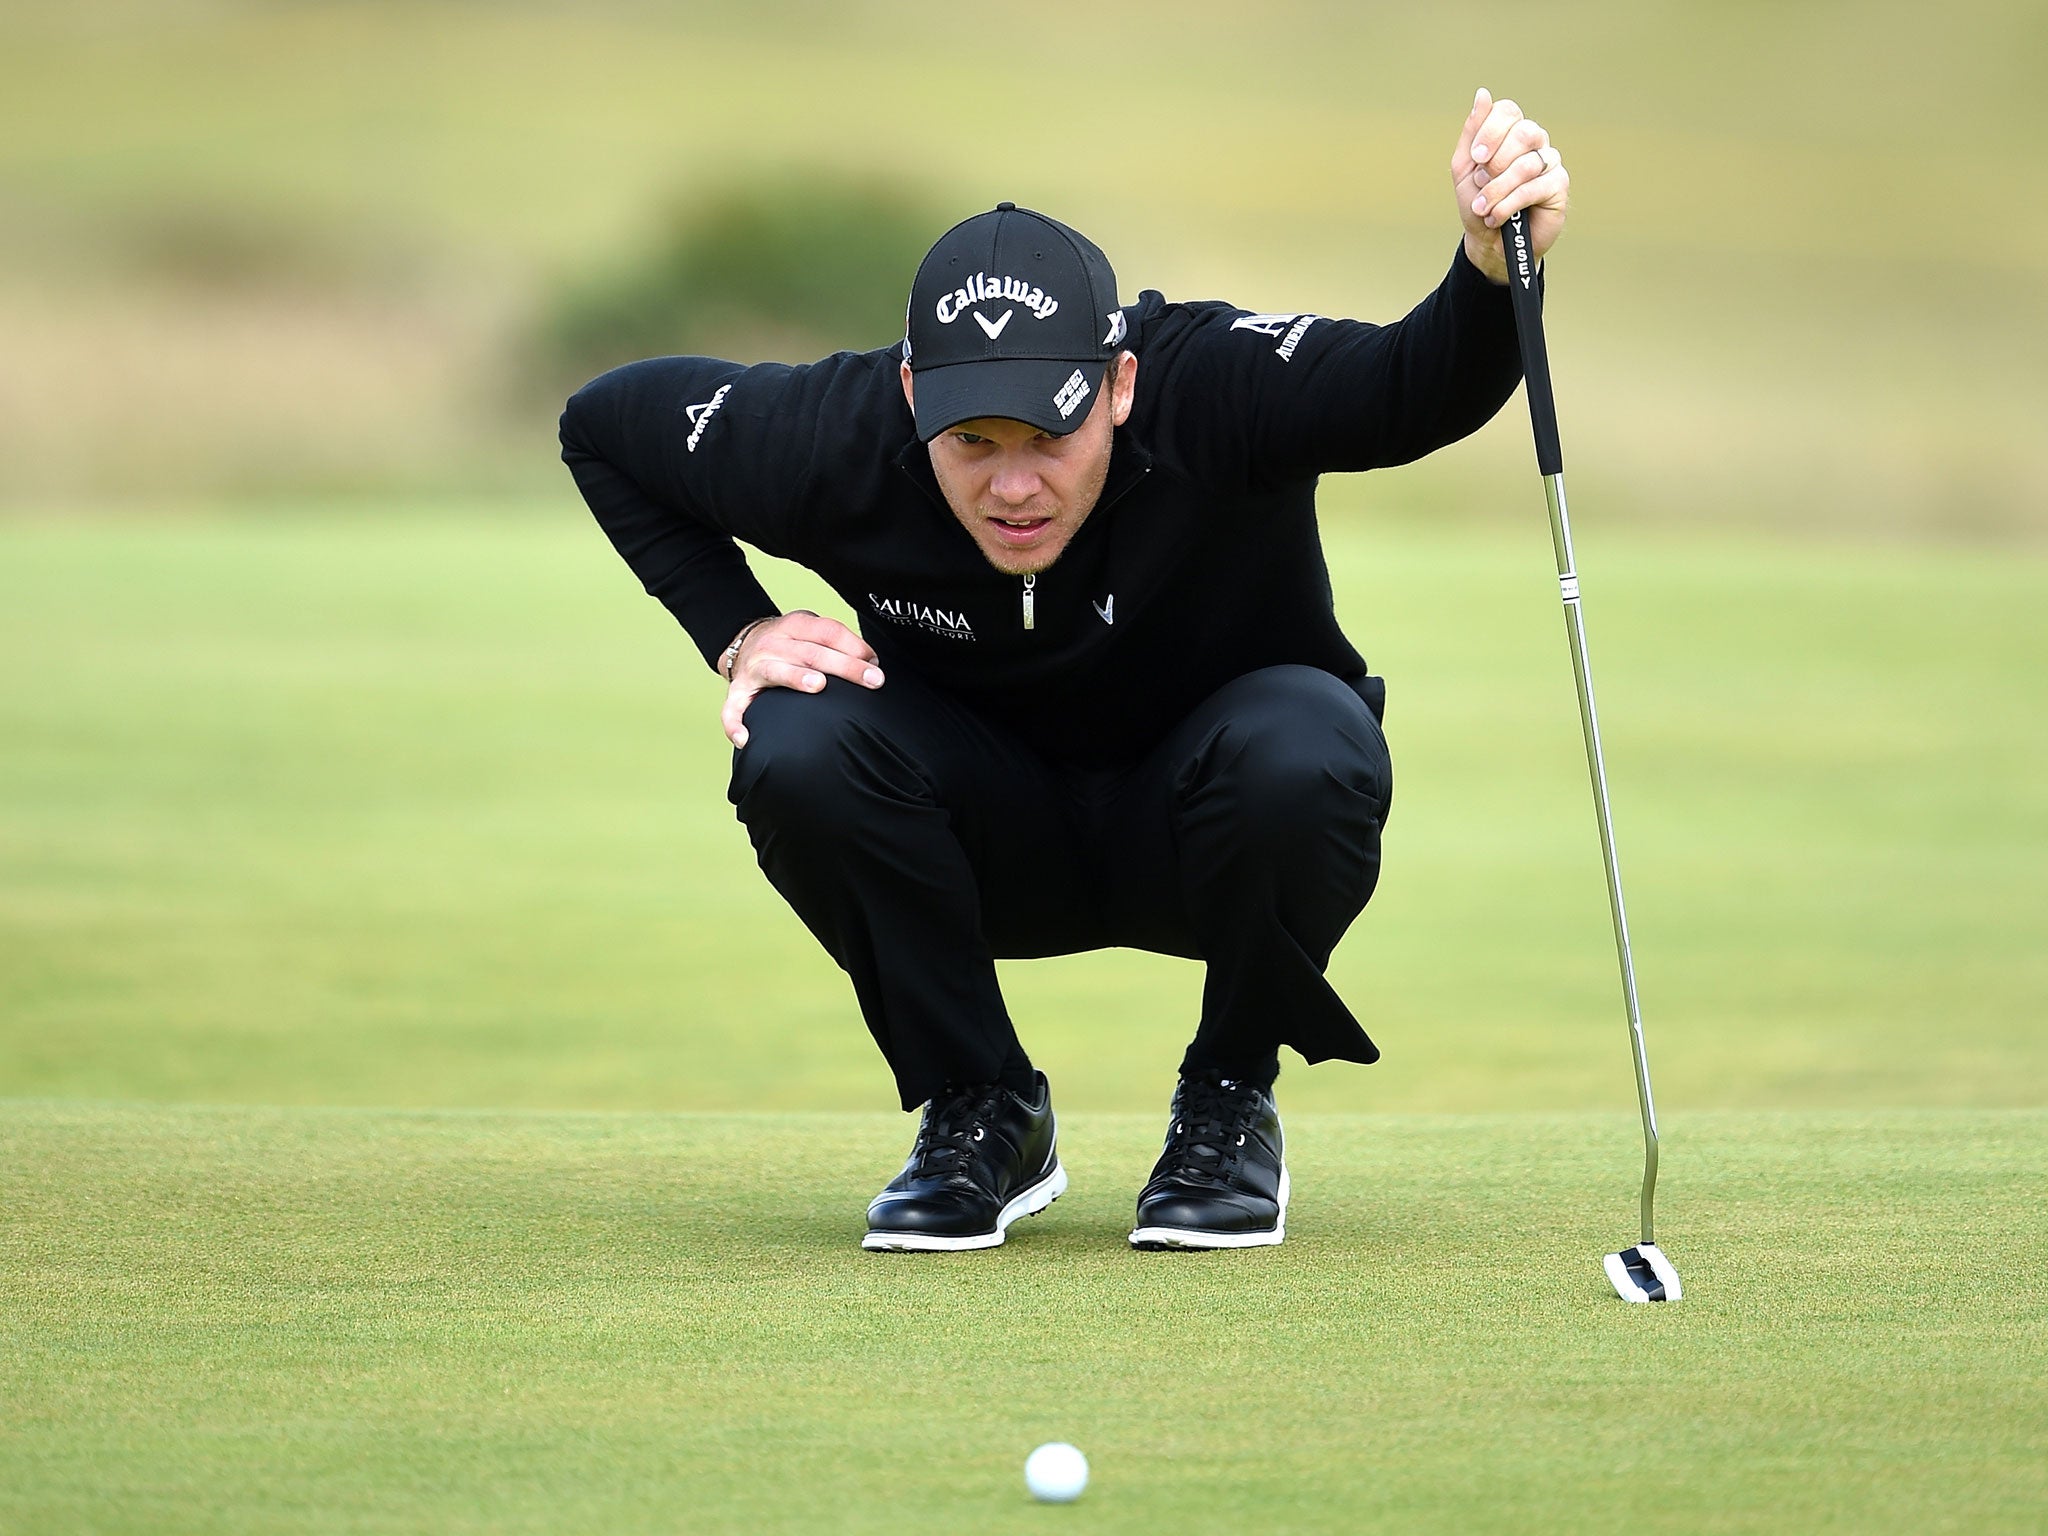 England's Danny Willett is in contention at The Open